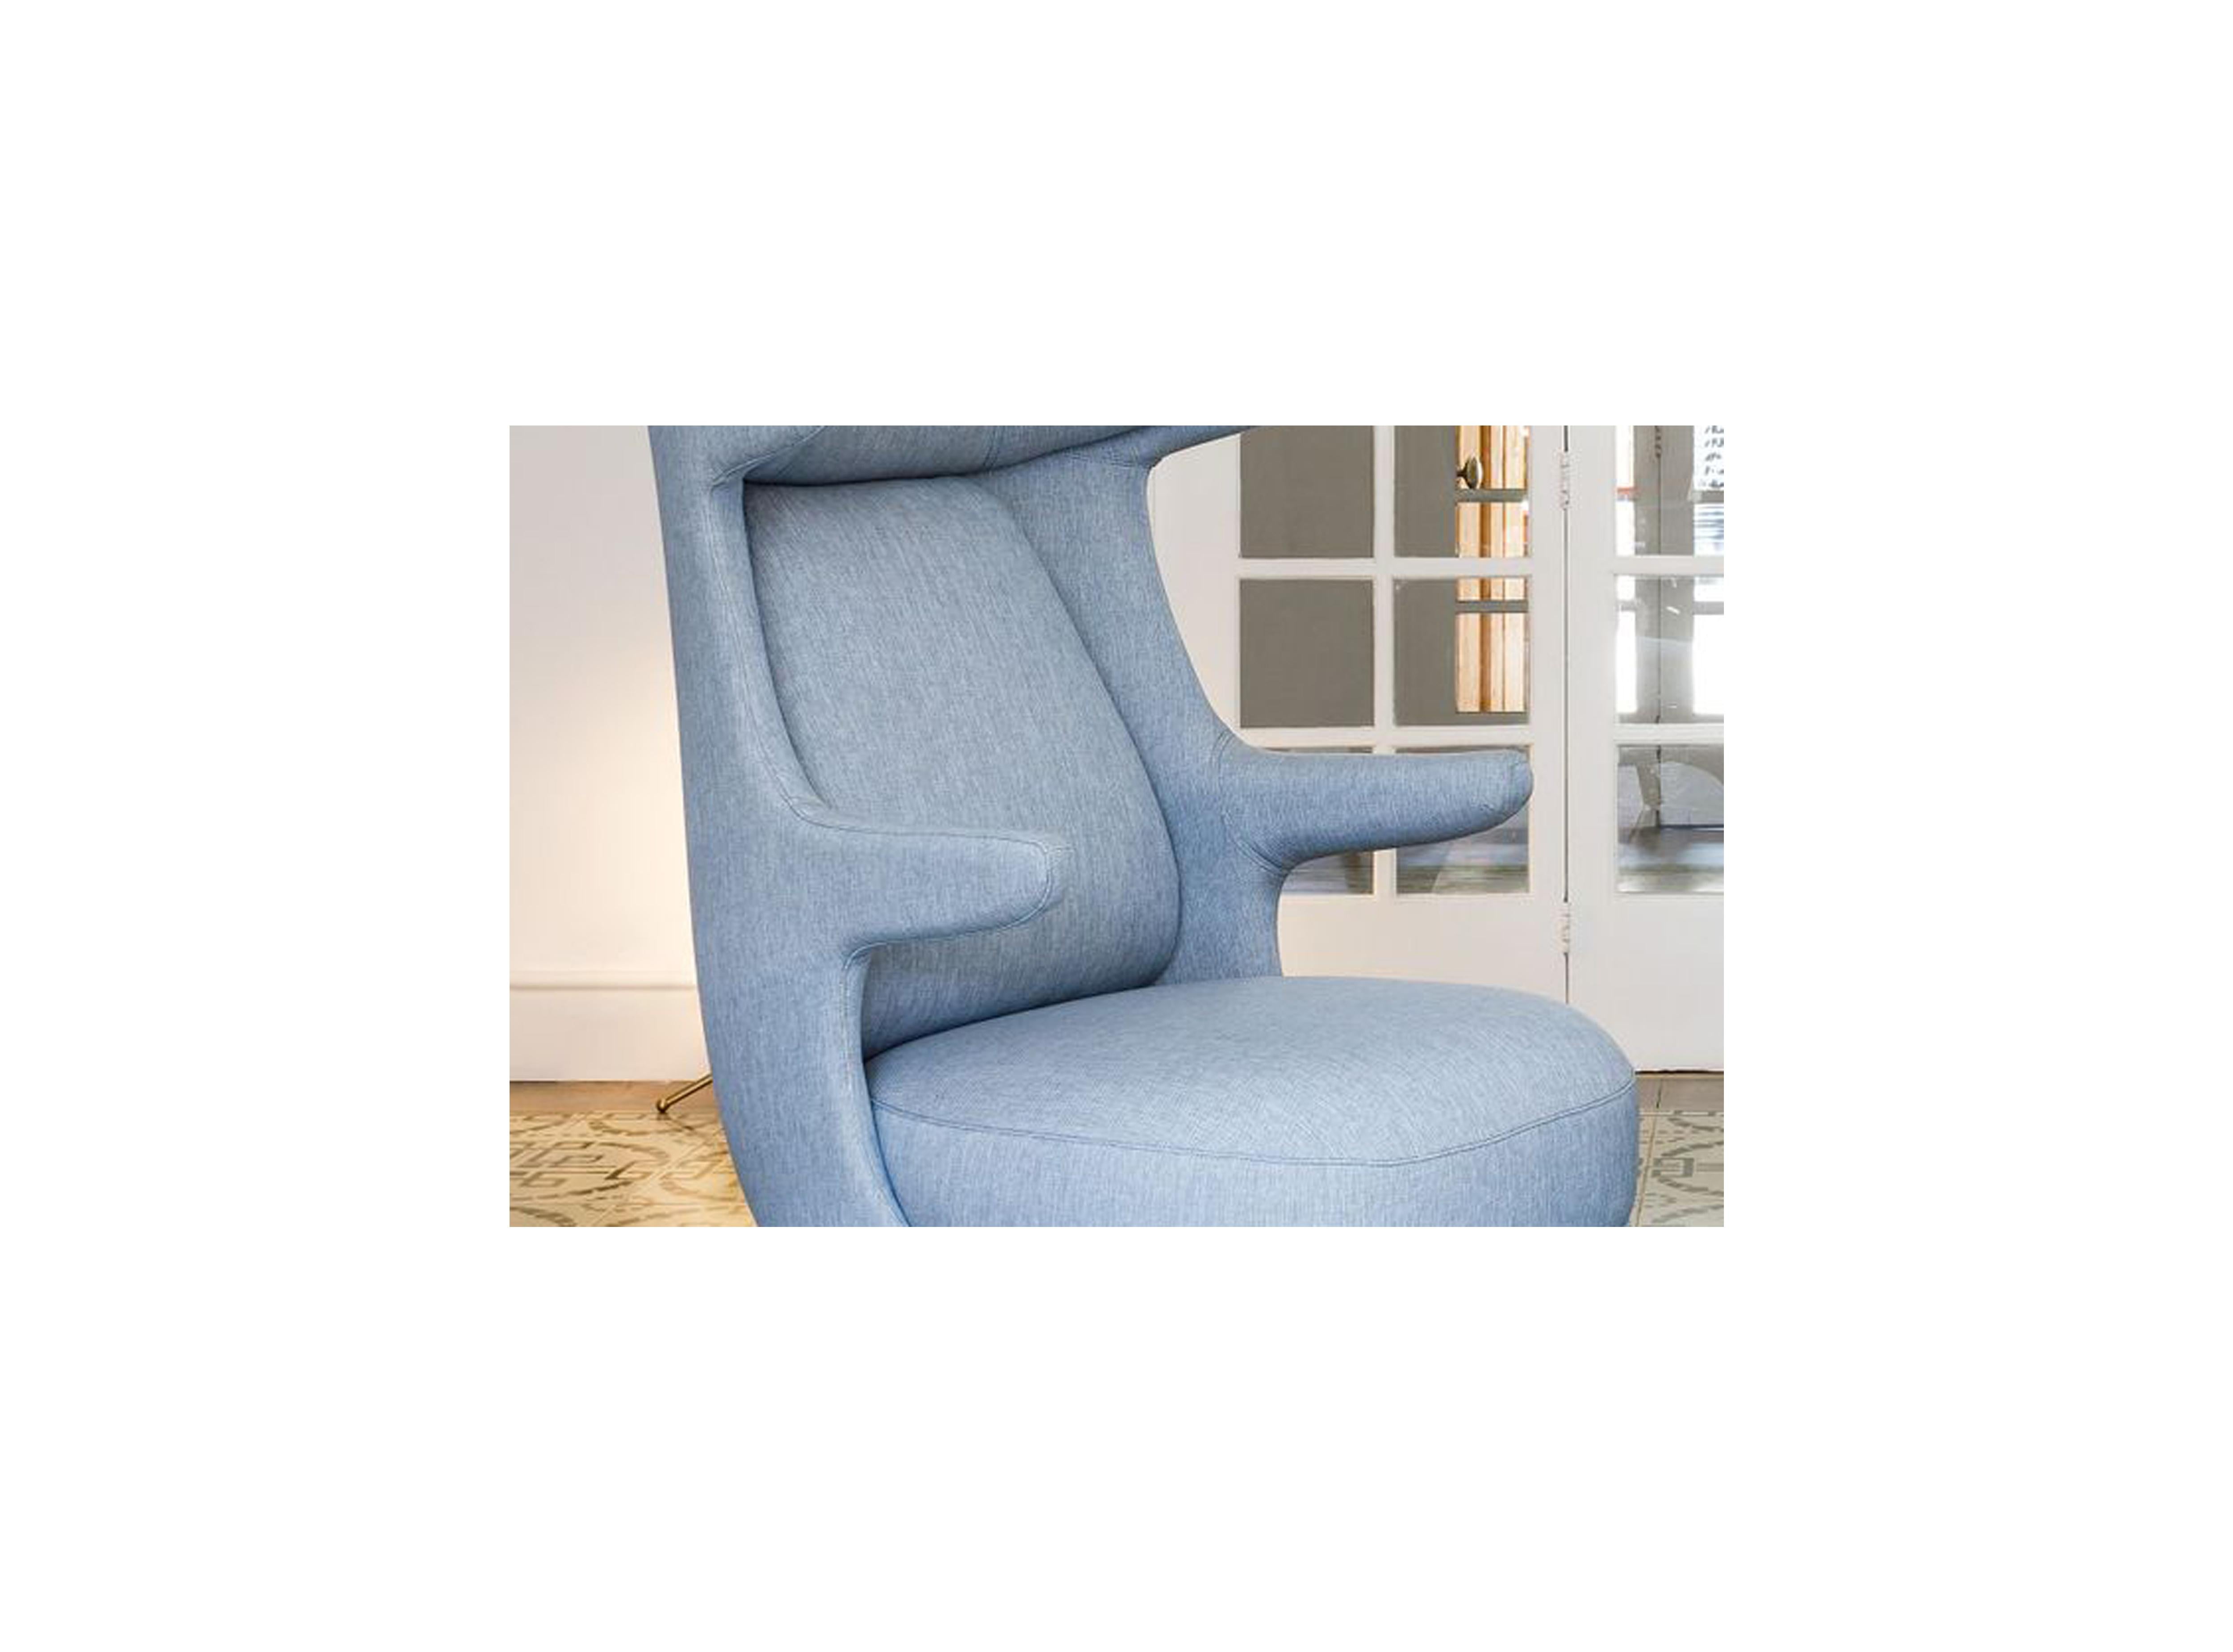 Spanish Jaime Hayon, Contemporary, Monocolor in Blue Fabric Upholstery Dino Armchair For Sale